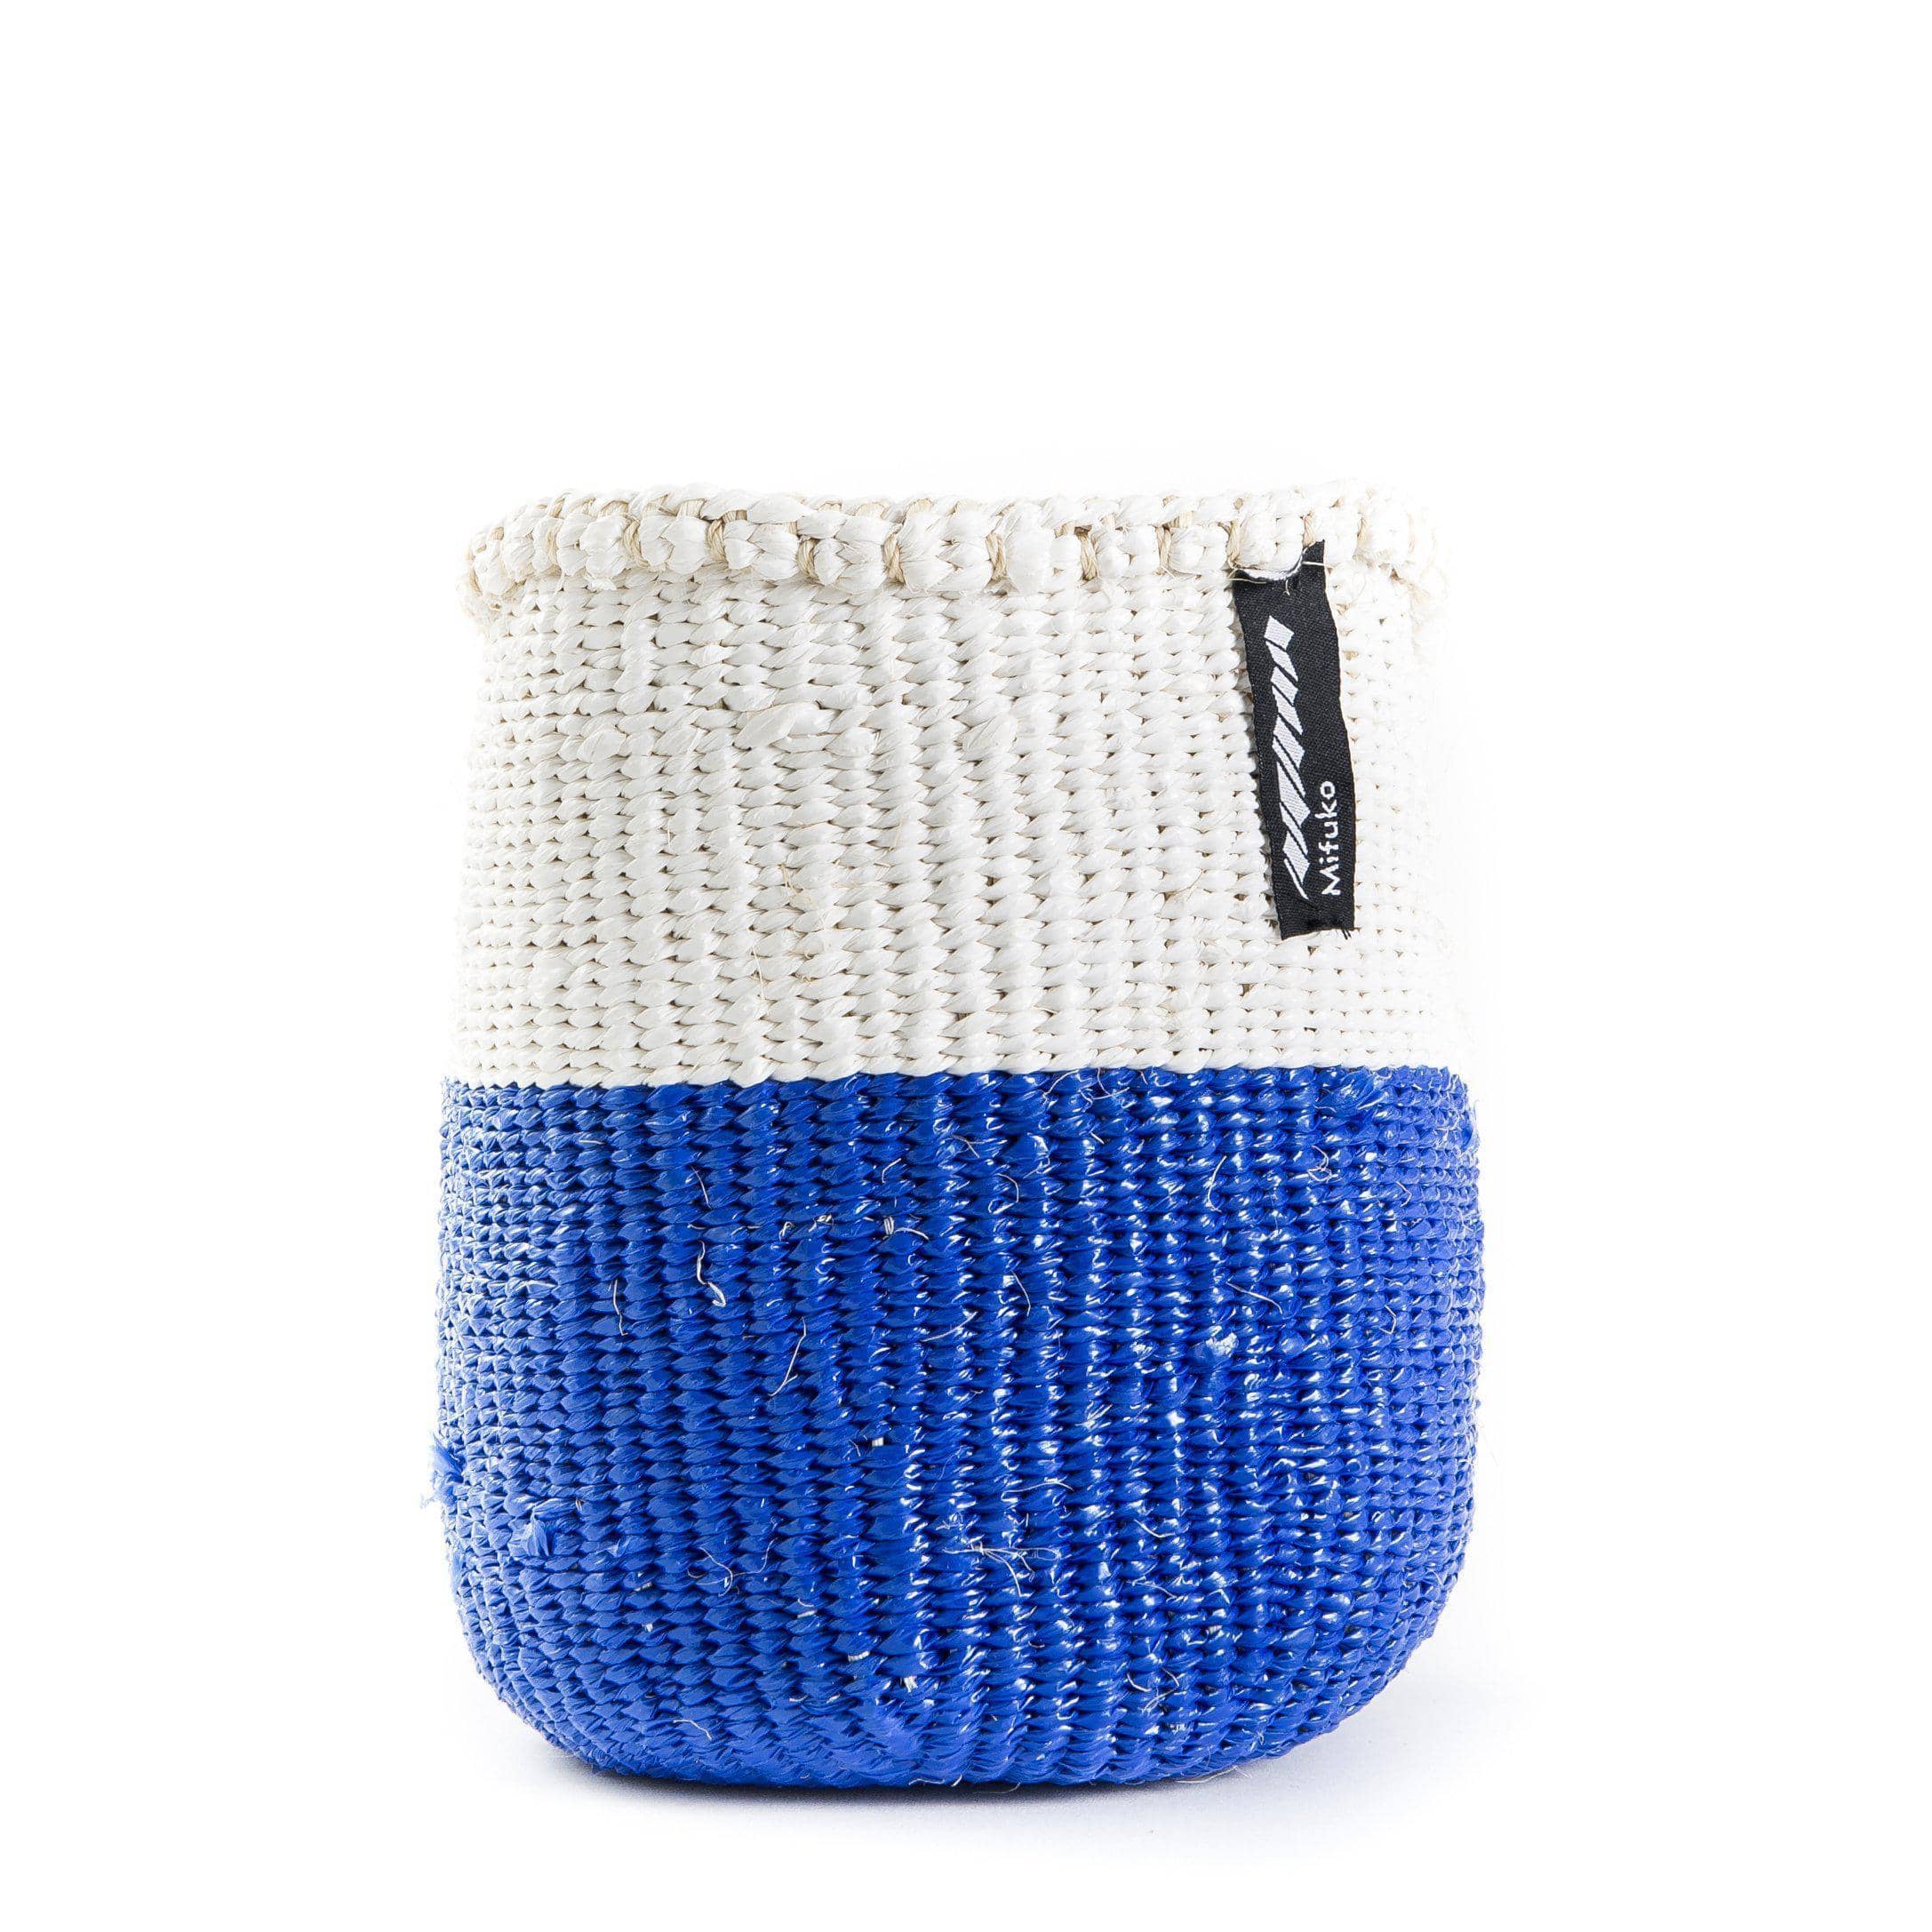 Handmade fair trade Partly recycled plastic and sisal Kiondo basket | White and blue duo XS